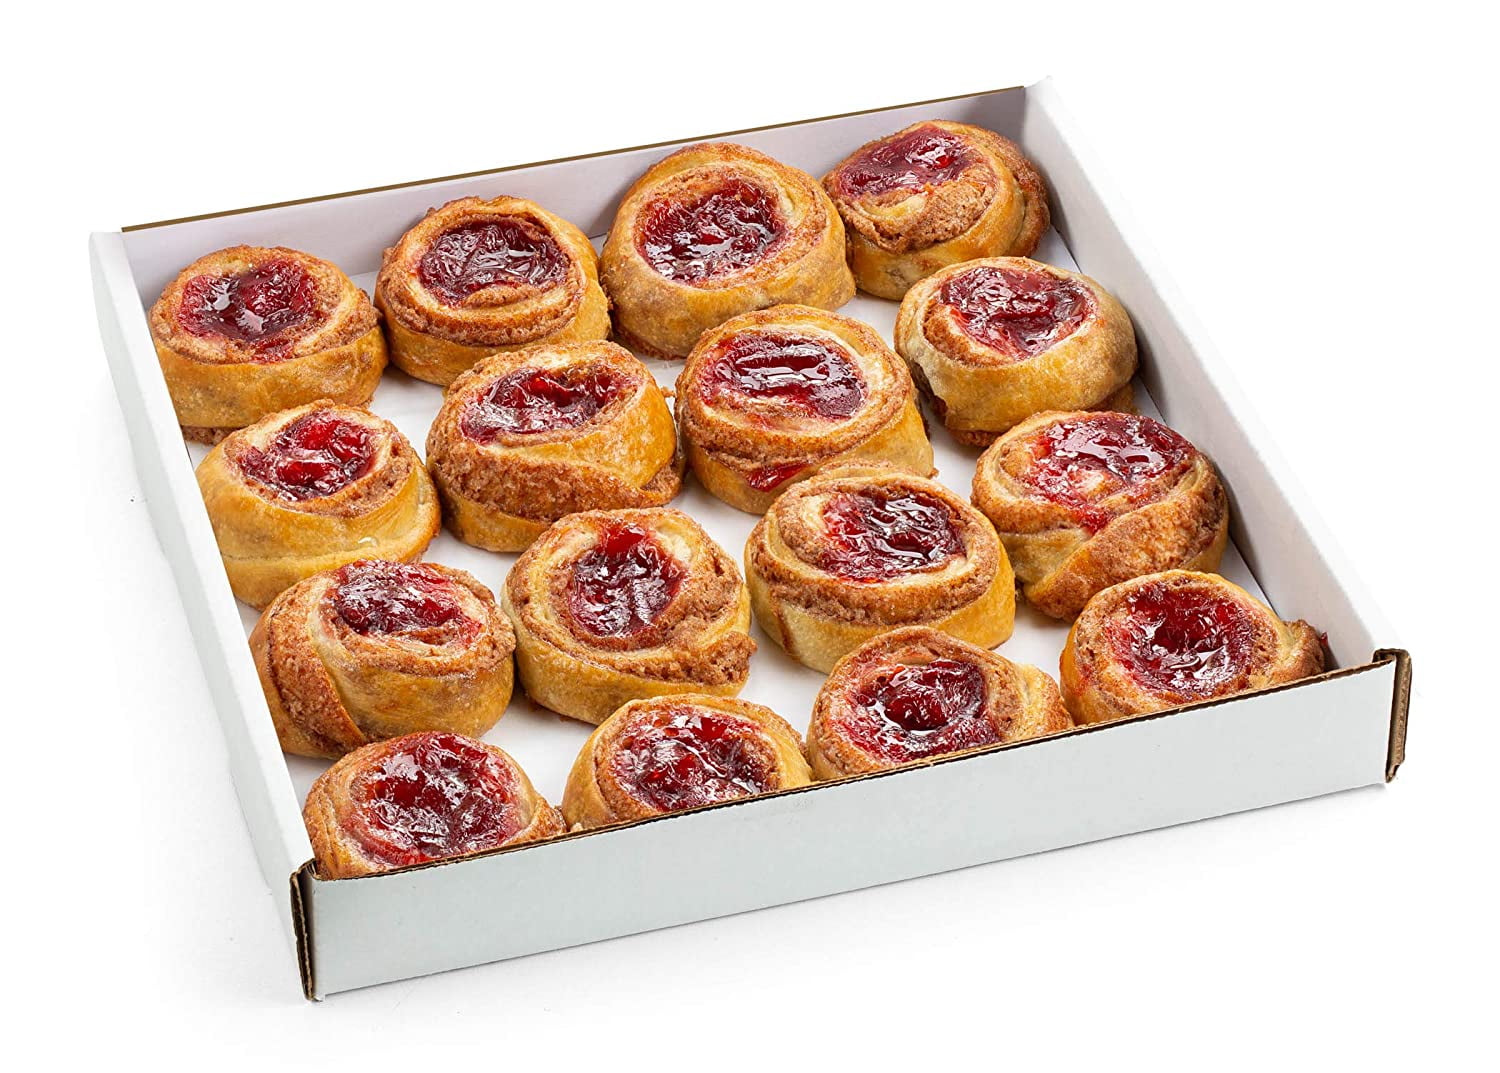 Bakery Trends: Mini Pastries are a Big Thing